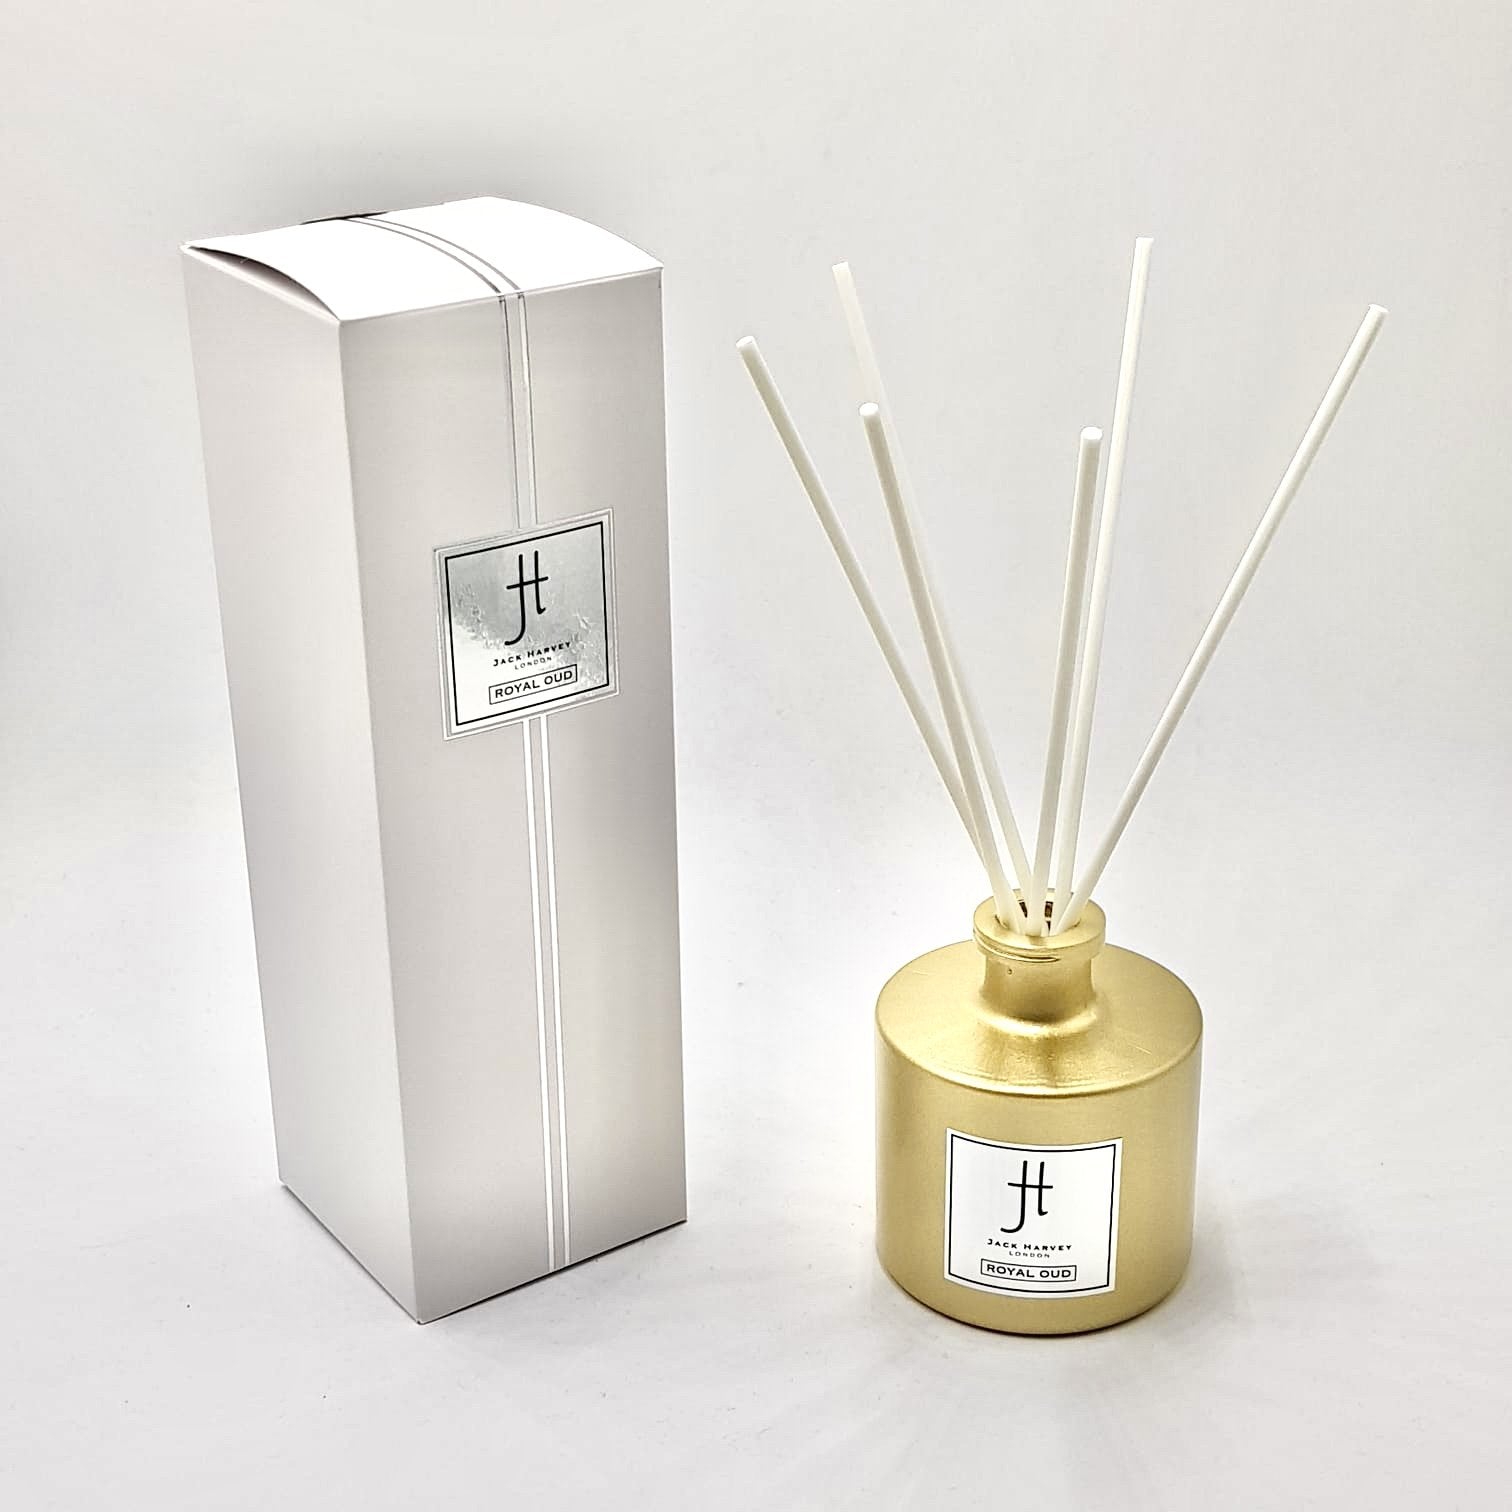 CHELSEA GOLD LIMITED EDITION -  200ml GOLD REED DIFFUSER